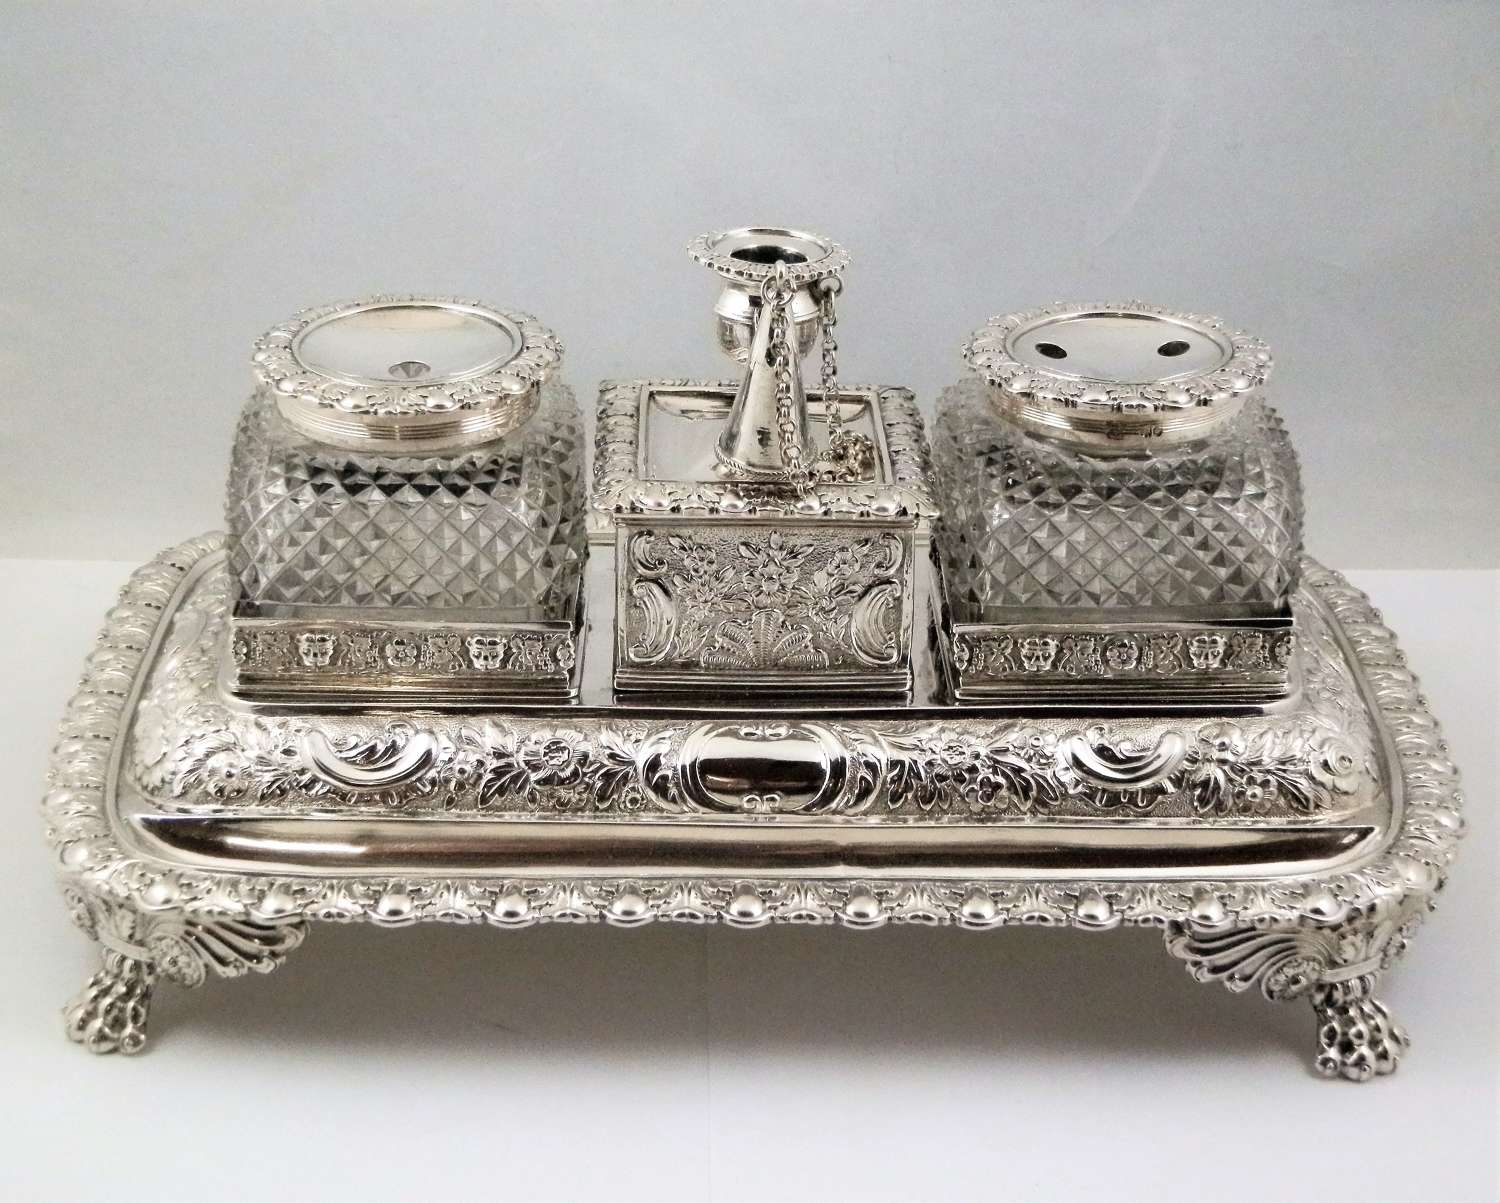 George III silver desk set by Emes and Barnard, London 1820